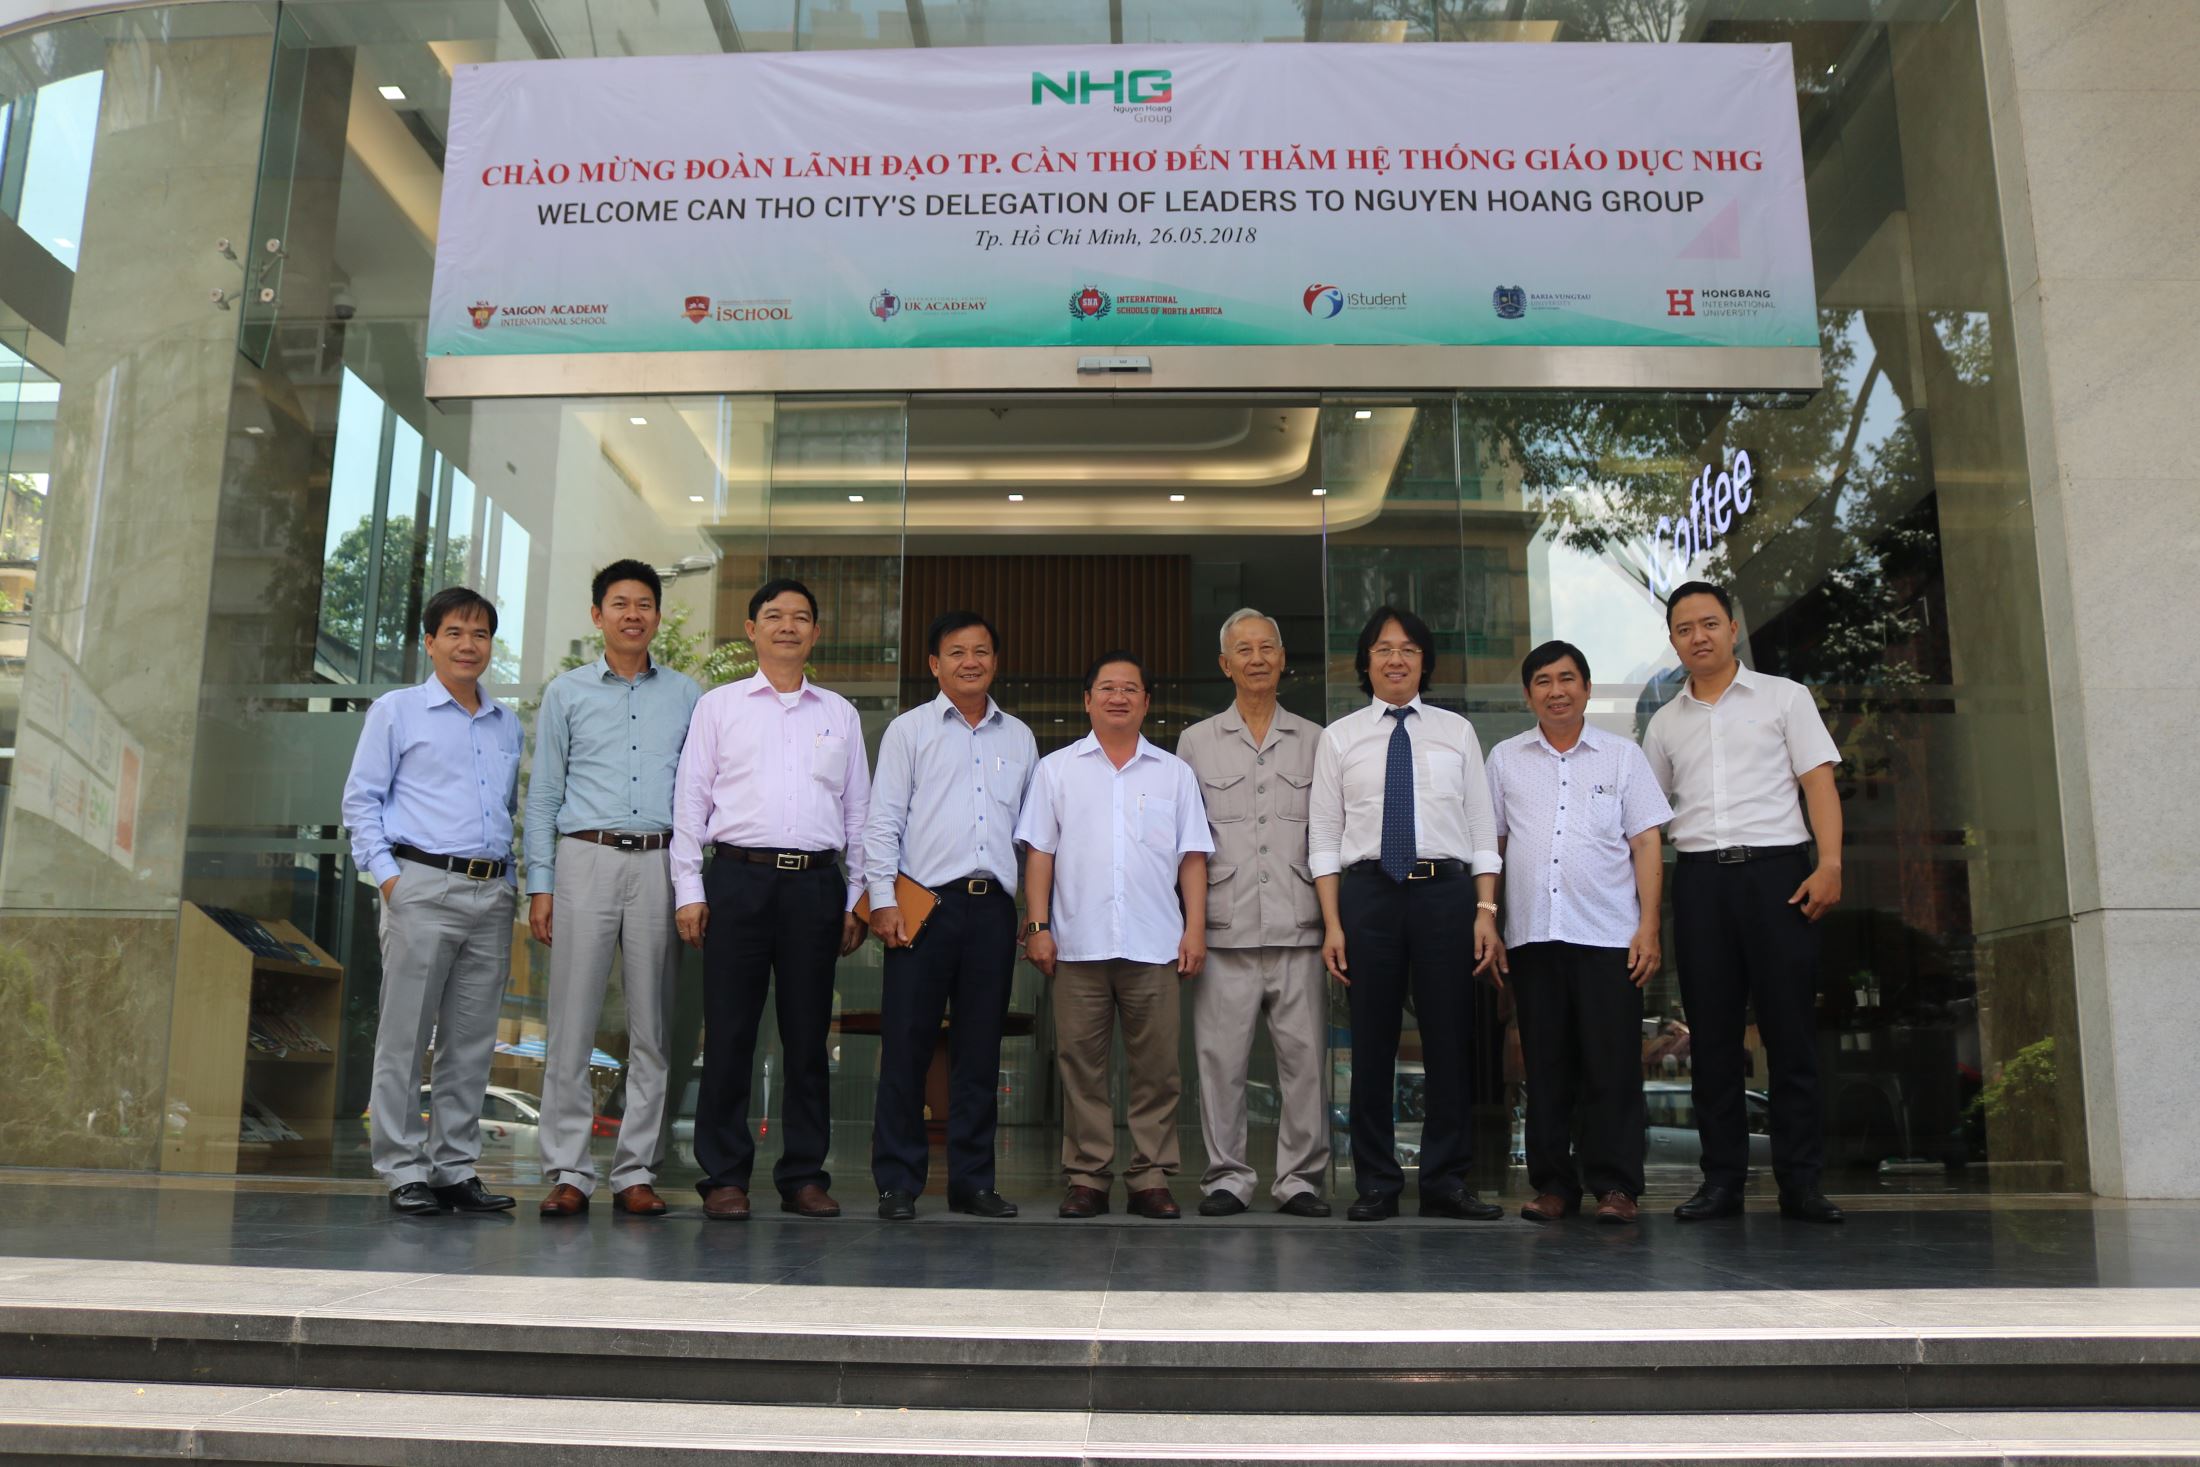 Can Tho city's delegation and NHG's leaders at NHG headquarter on May 26th